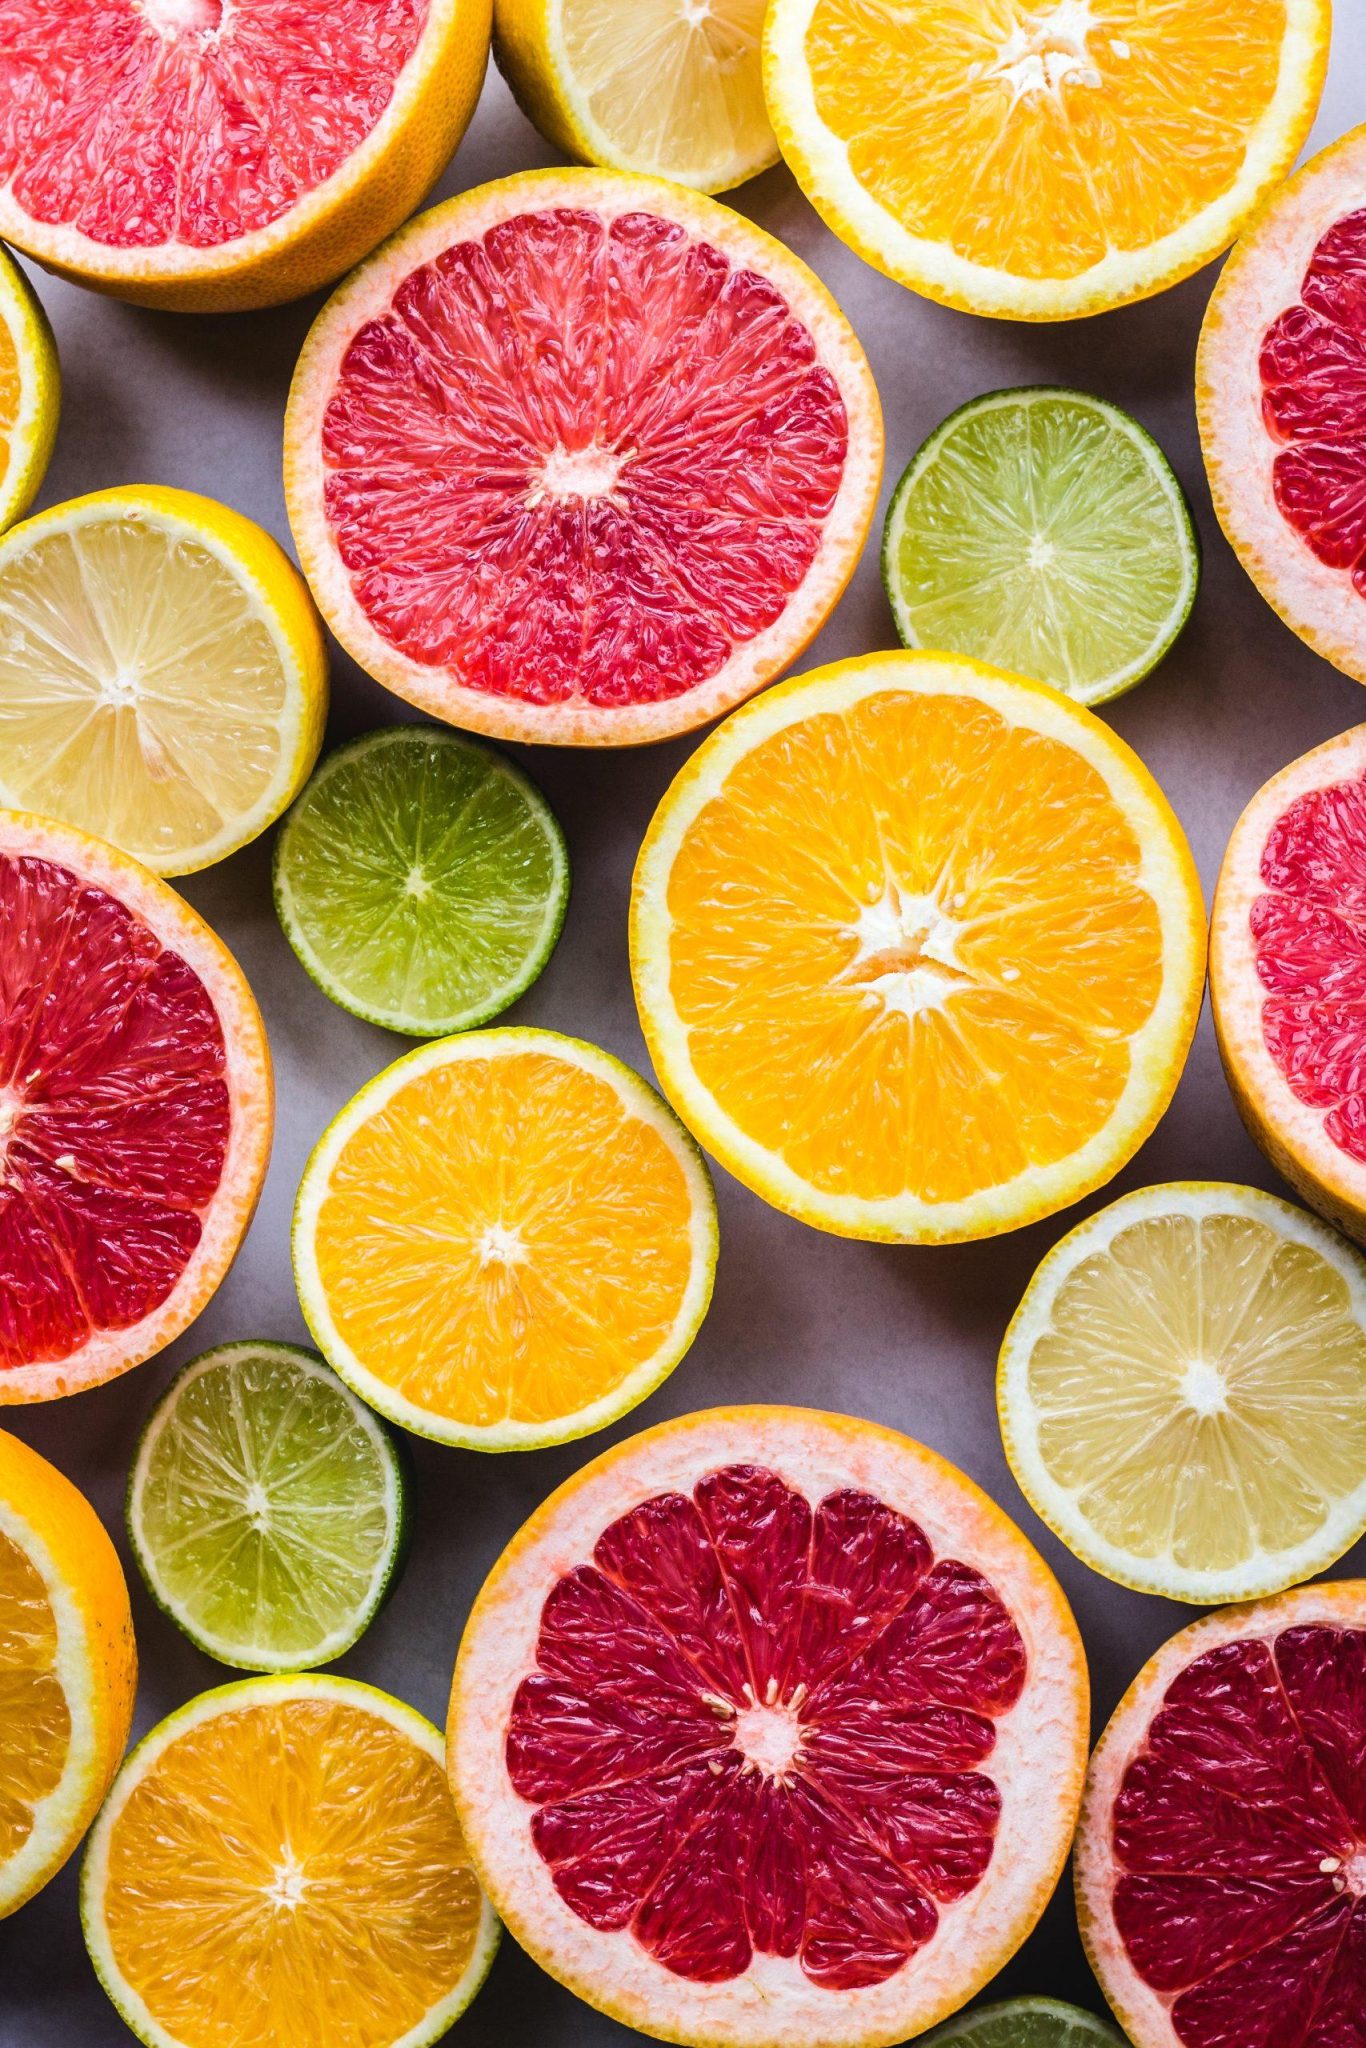 Use citrus to clean your home